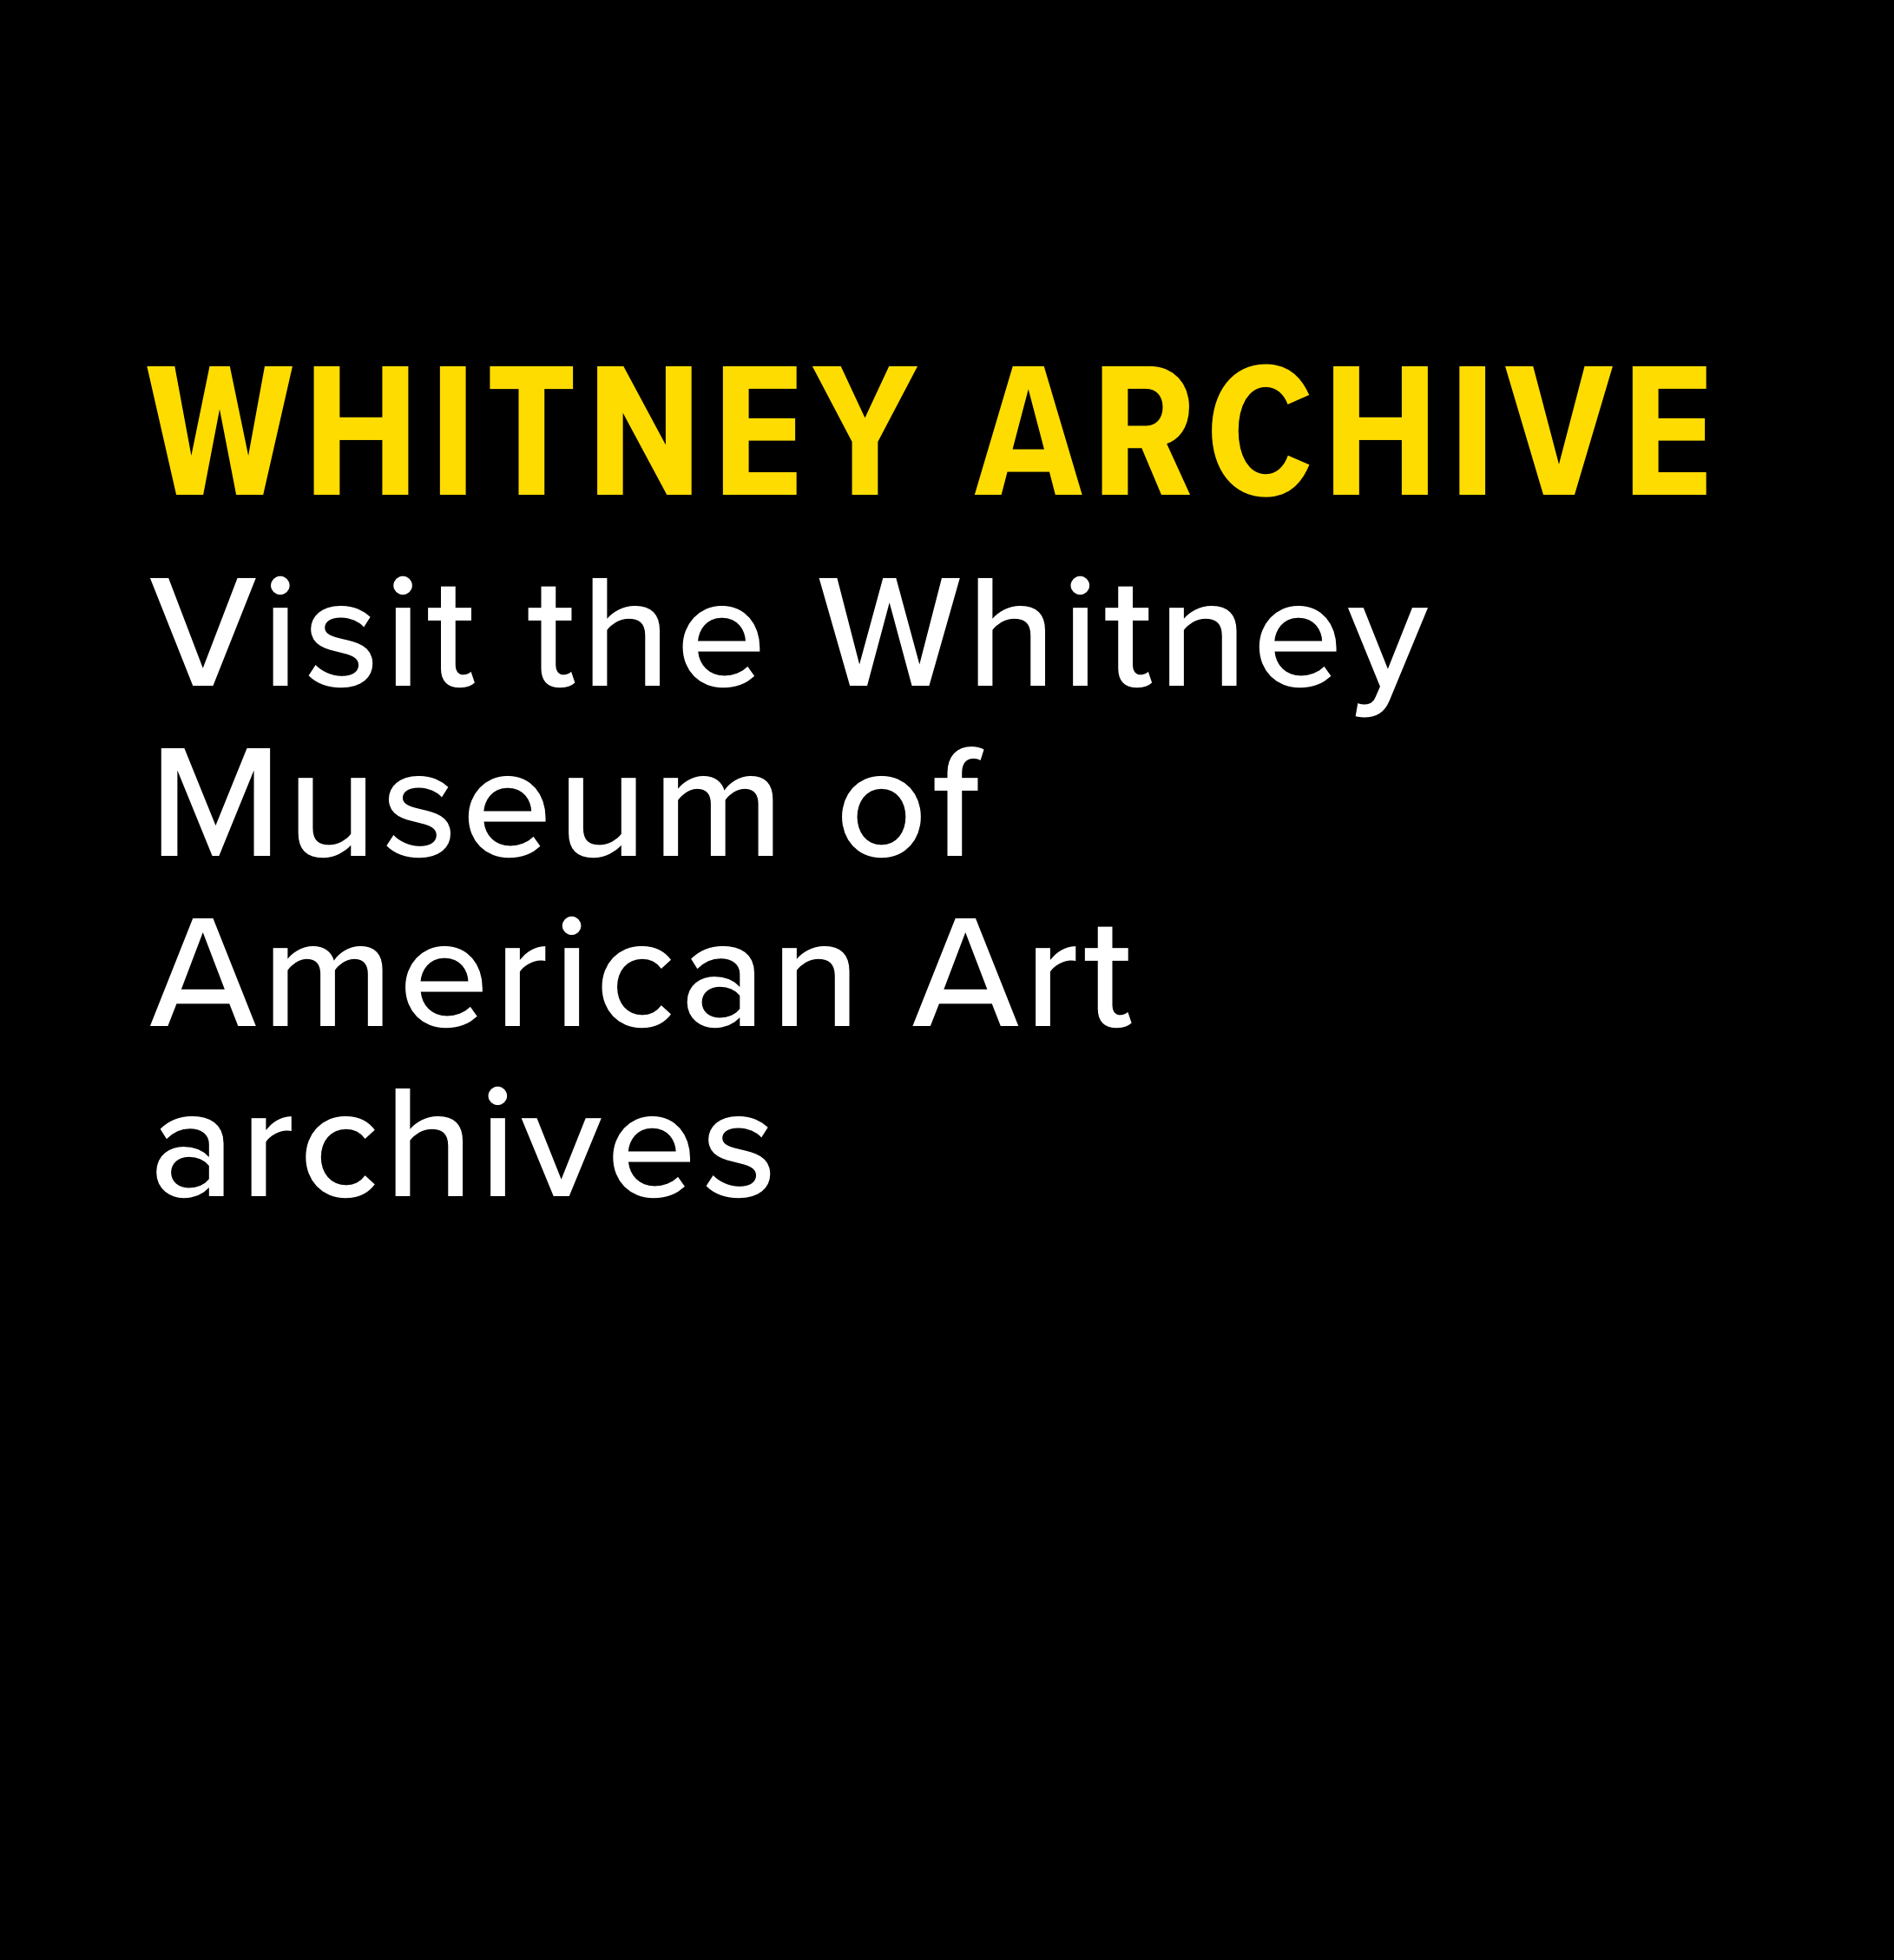 Visit the Whitney Museum of American Art archives